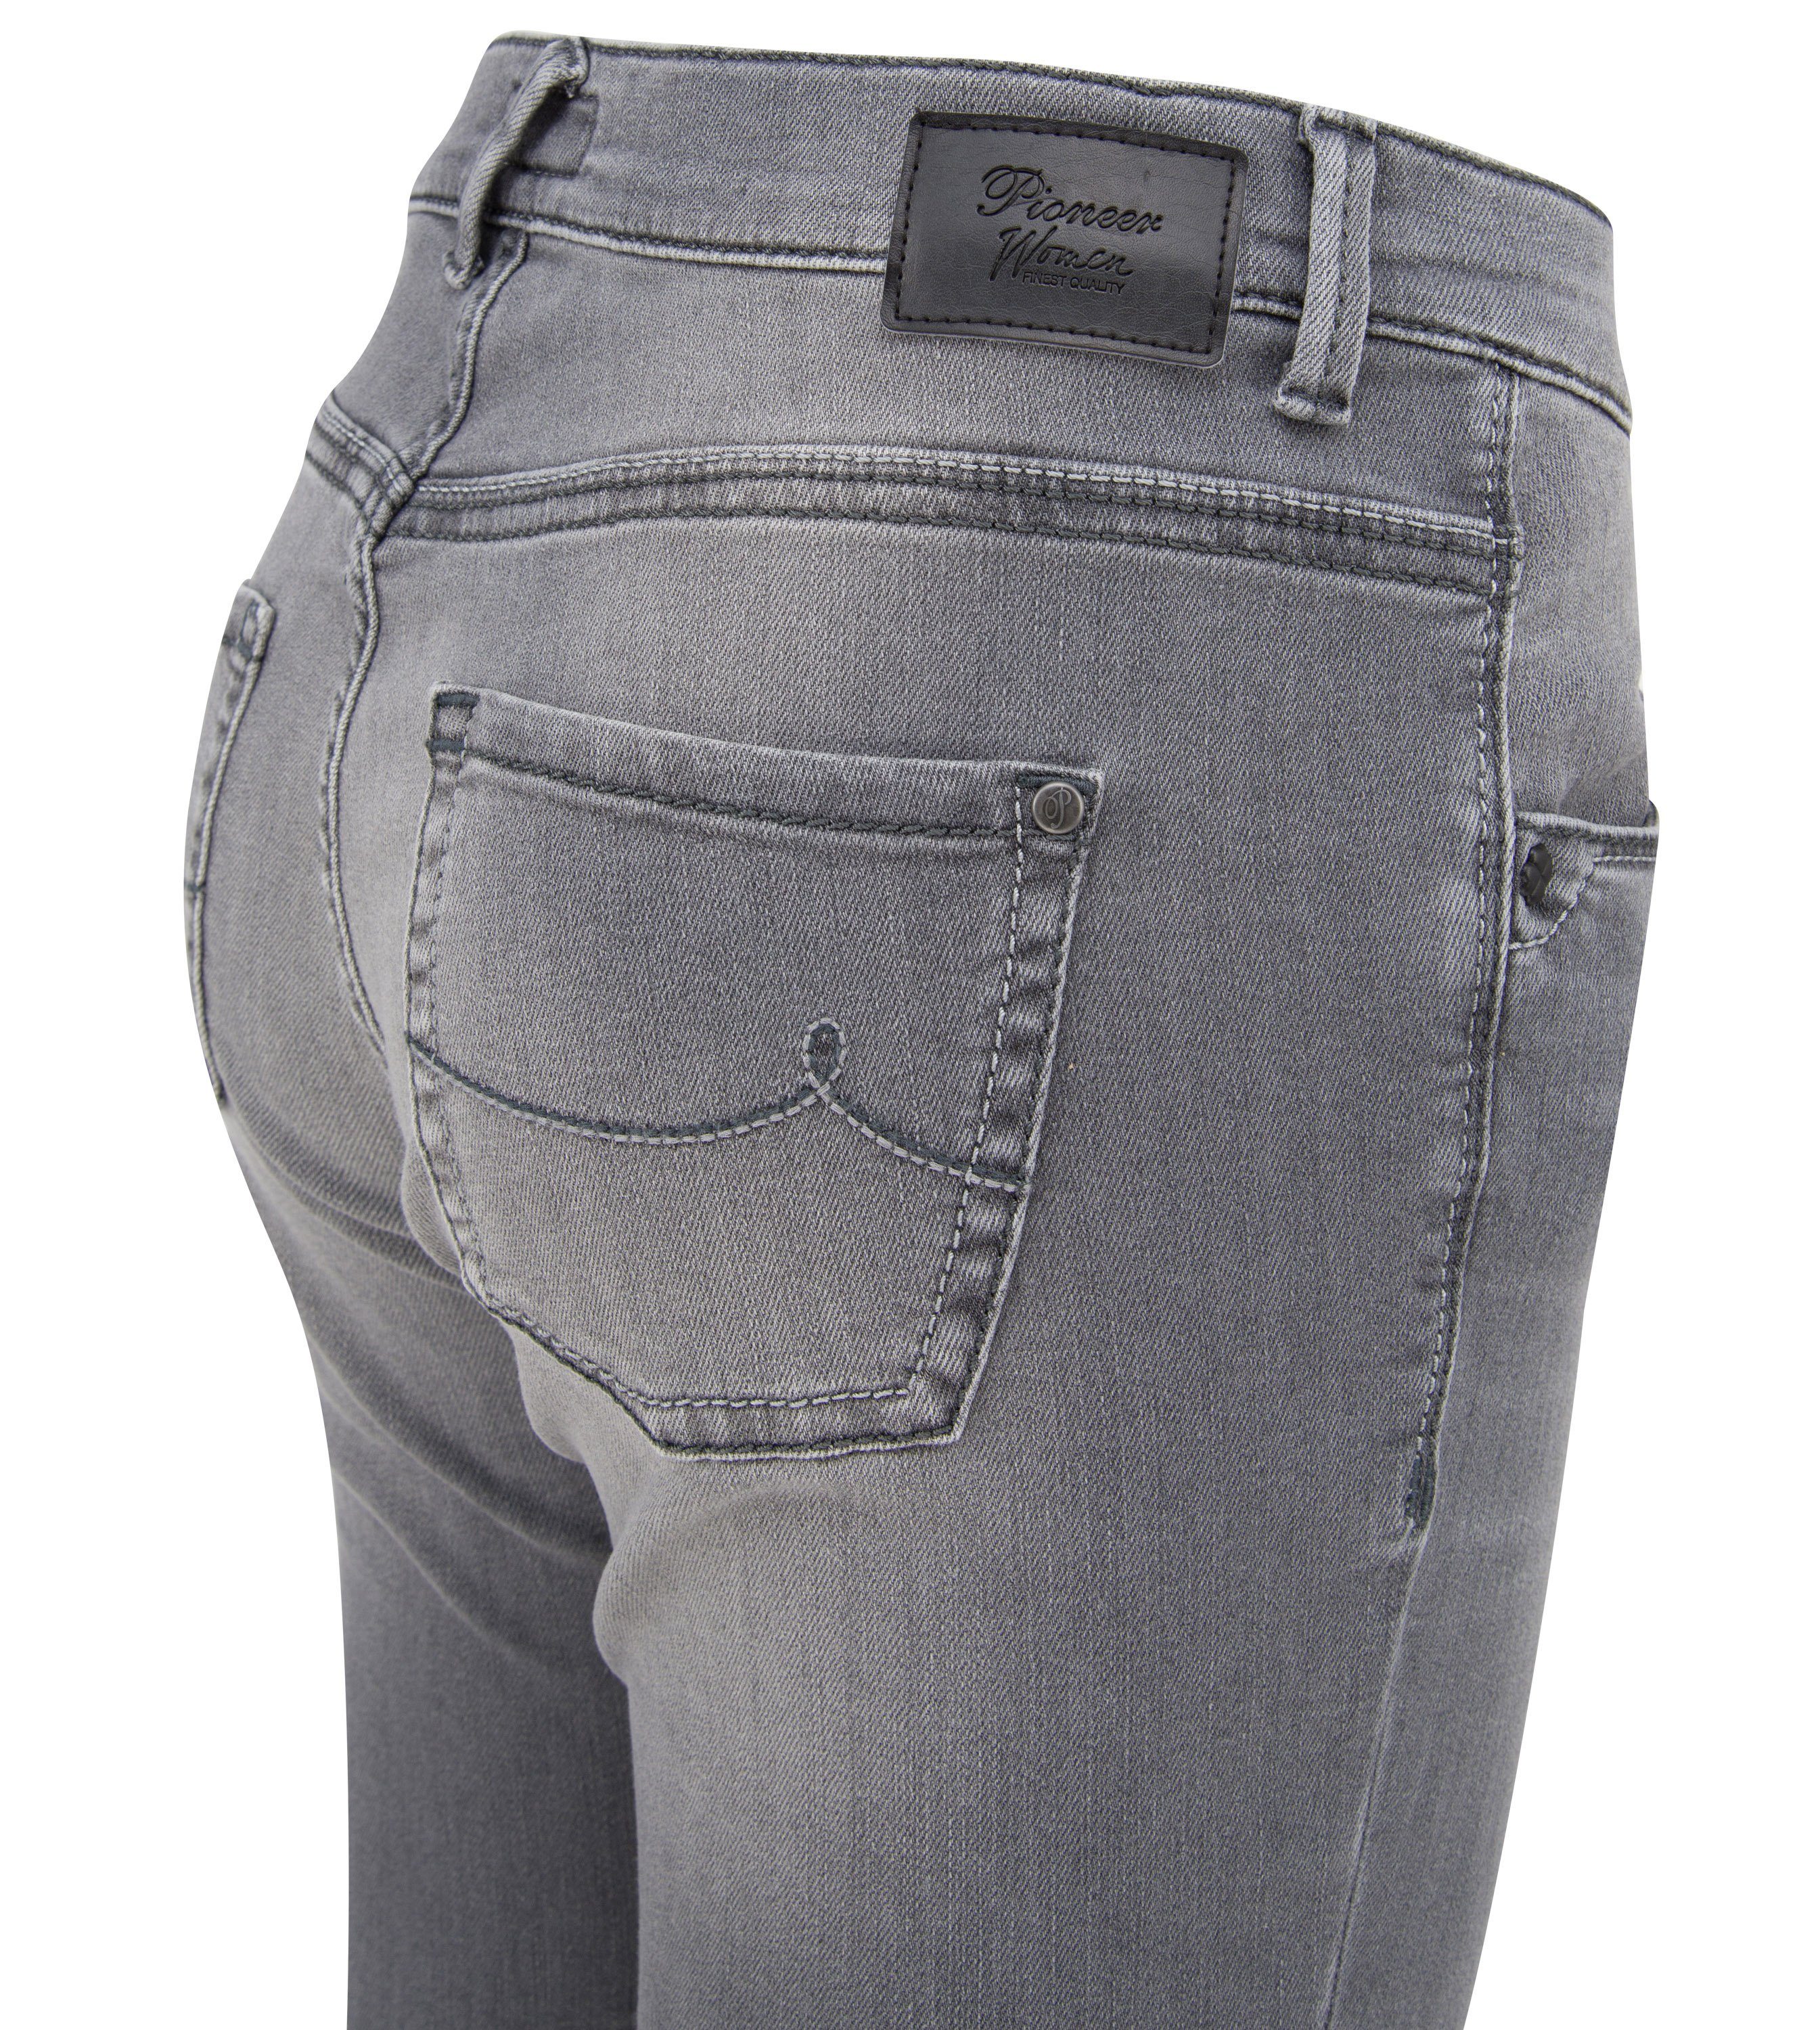 PIONEER used Authentic 5012.9834 SALLY POWERSTRETCH - Jeans grey 3290 Pioneer Stretch-Jeans